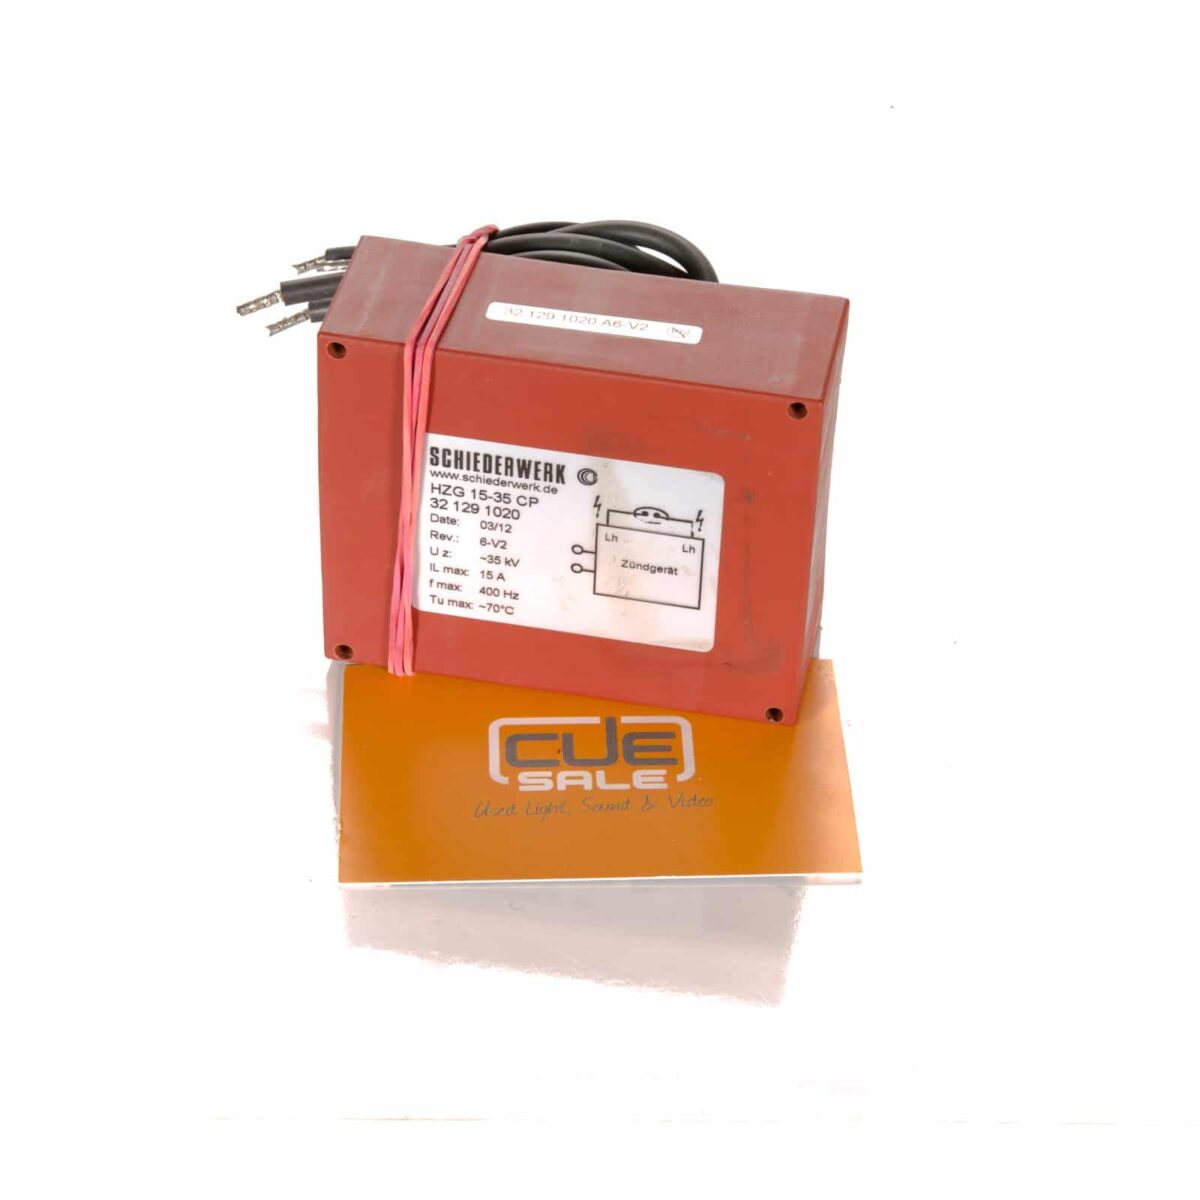 Clay Paky Hot restrike ignitor for Alpha 1200 series